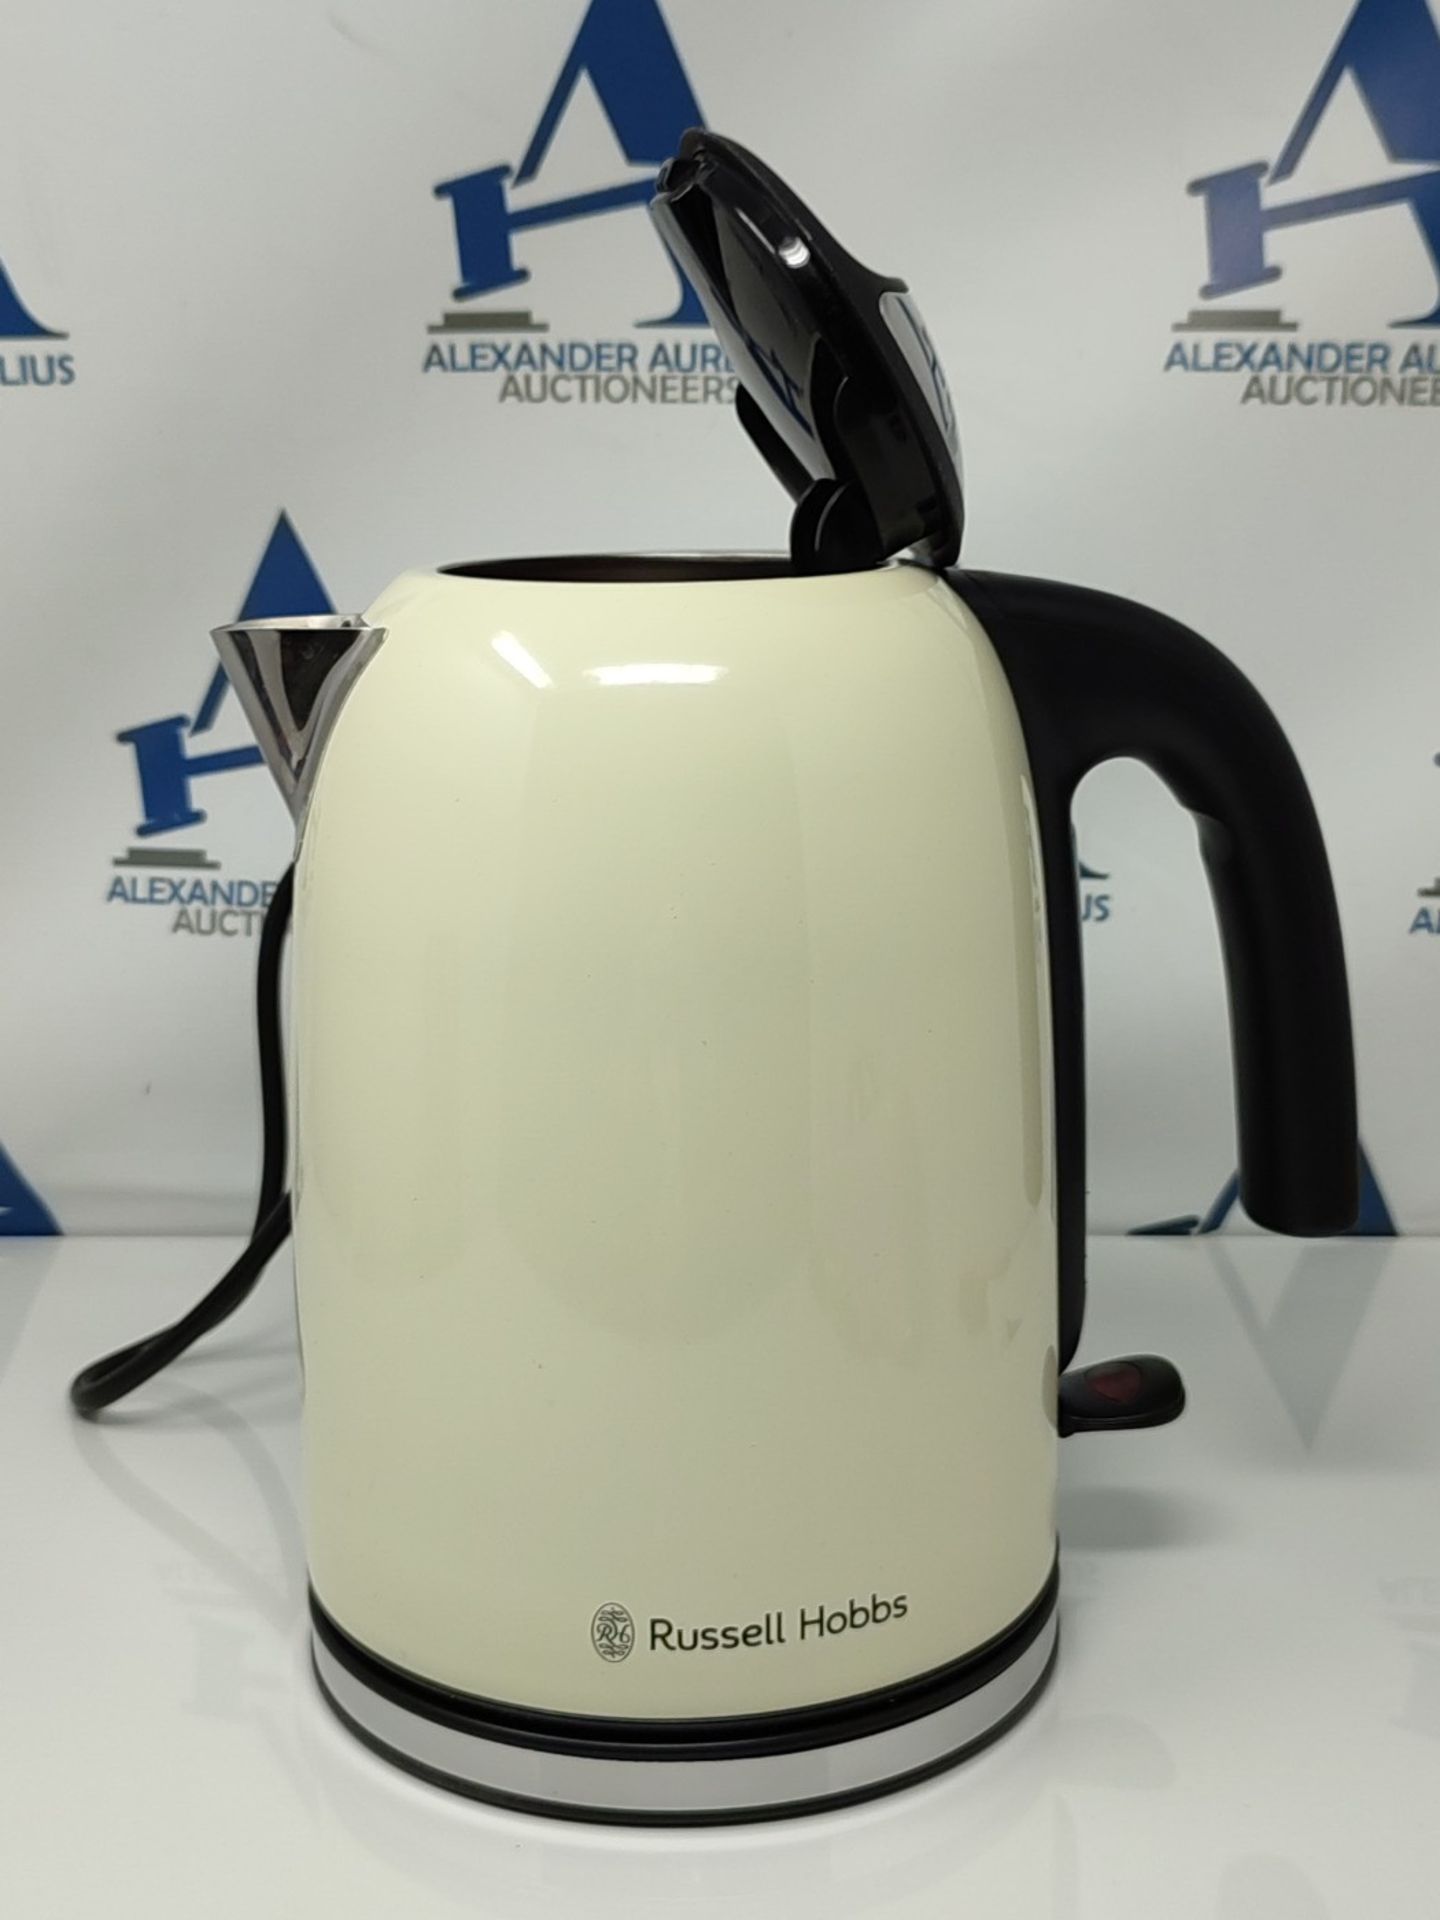 Russell Hobbs 20415 Stainless Steel Electric Kettle, 1.7 Litre, Cream - Image 3 of 3